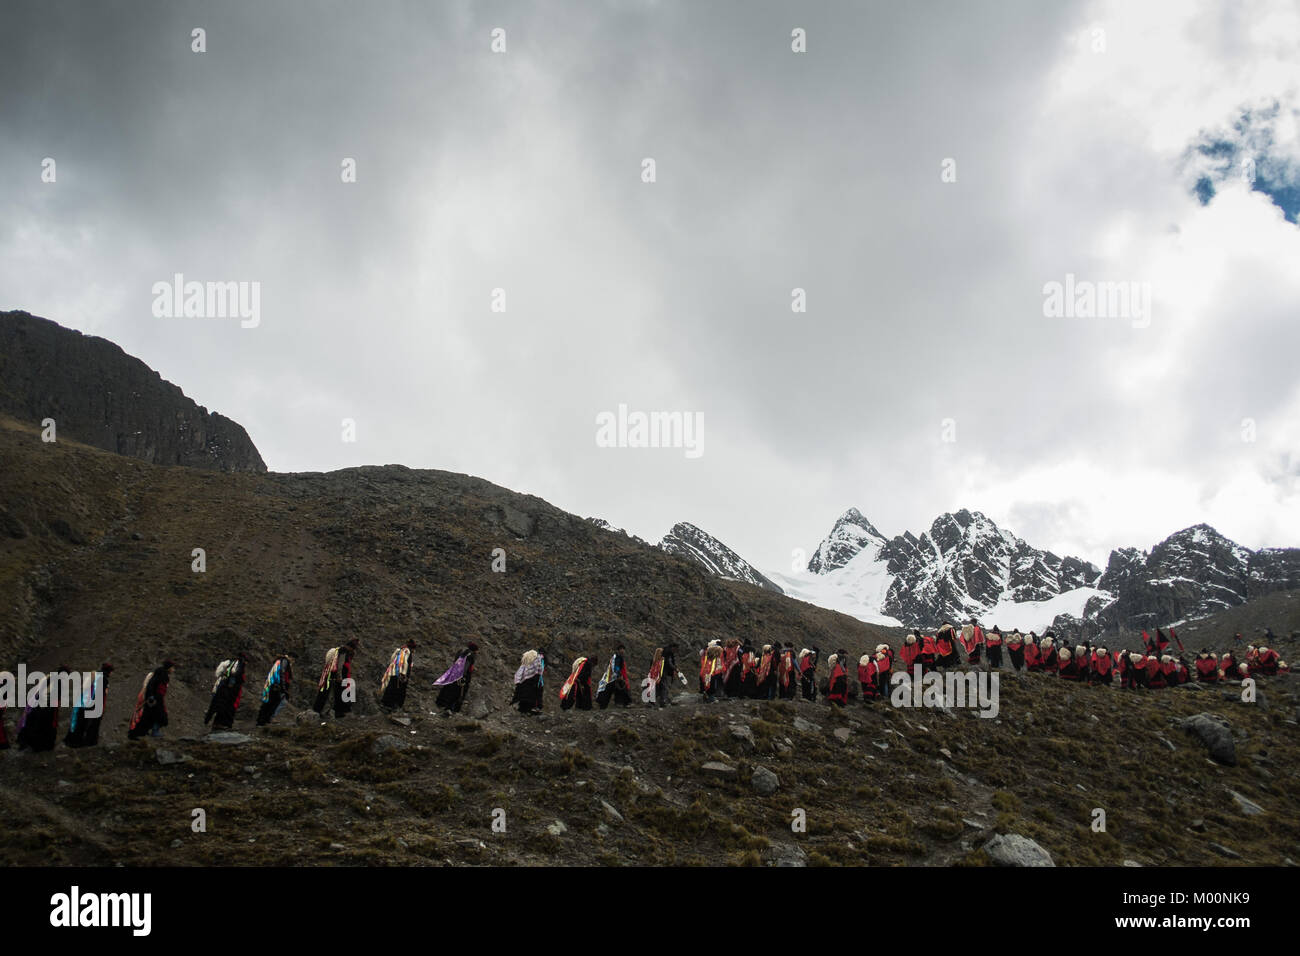 Cusco, Peru. 29th Dec, 2017. Members of the Paucartambo nation, ascend to Ausangate Mountain, at 6362m, carrying their cross to be blessed by the Lord of Qoyllur Riti.The pilgrimage includes processions with crosses that climb to the snowy summit of the mountain and then descend the next day.Quyllur Rit'i or Star Snow Festival is a spiritual and religious festival held Annually at the Sinakara Valley in the Cusco Region of Peru. Groups of Quero indigenous people climb Ausangate Mountain, at 6362m, in search of the Snow Star Which is reputedly buried Within the mountain.According to the Stock Photo